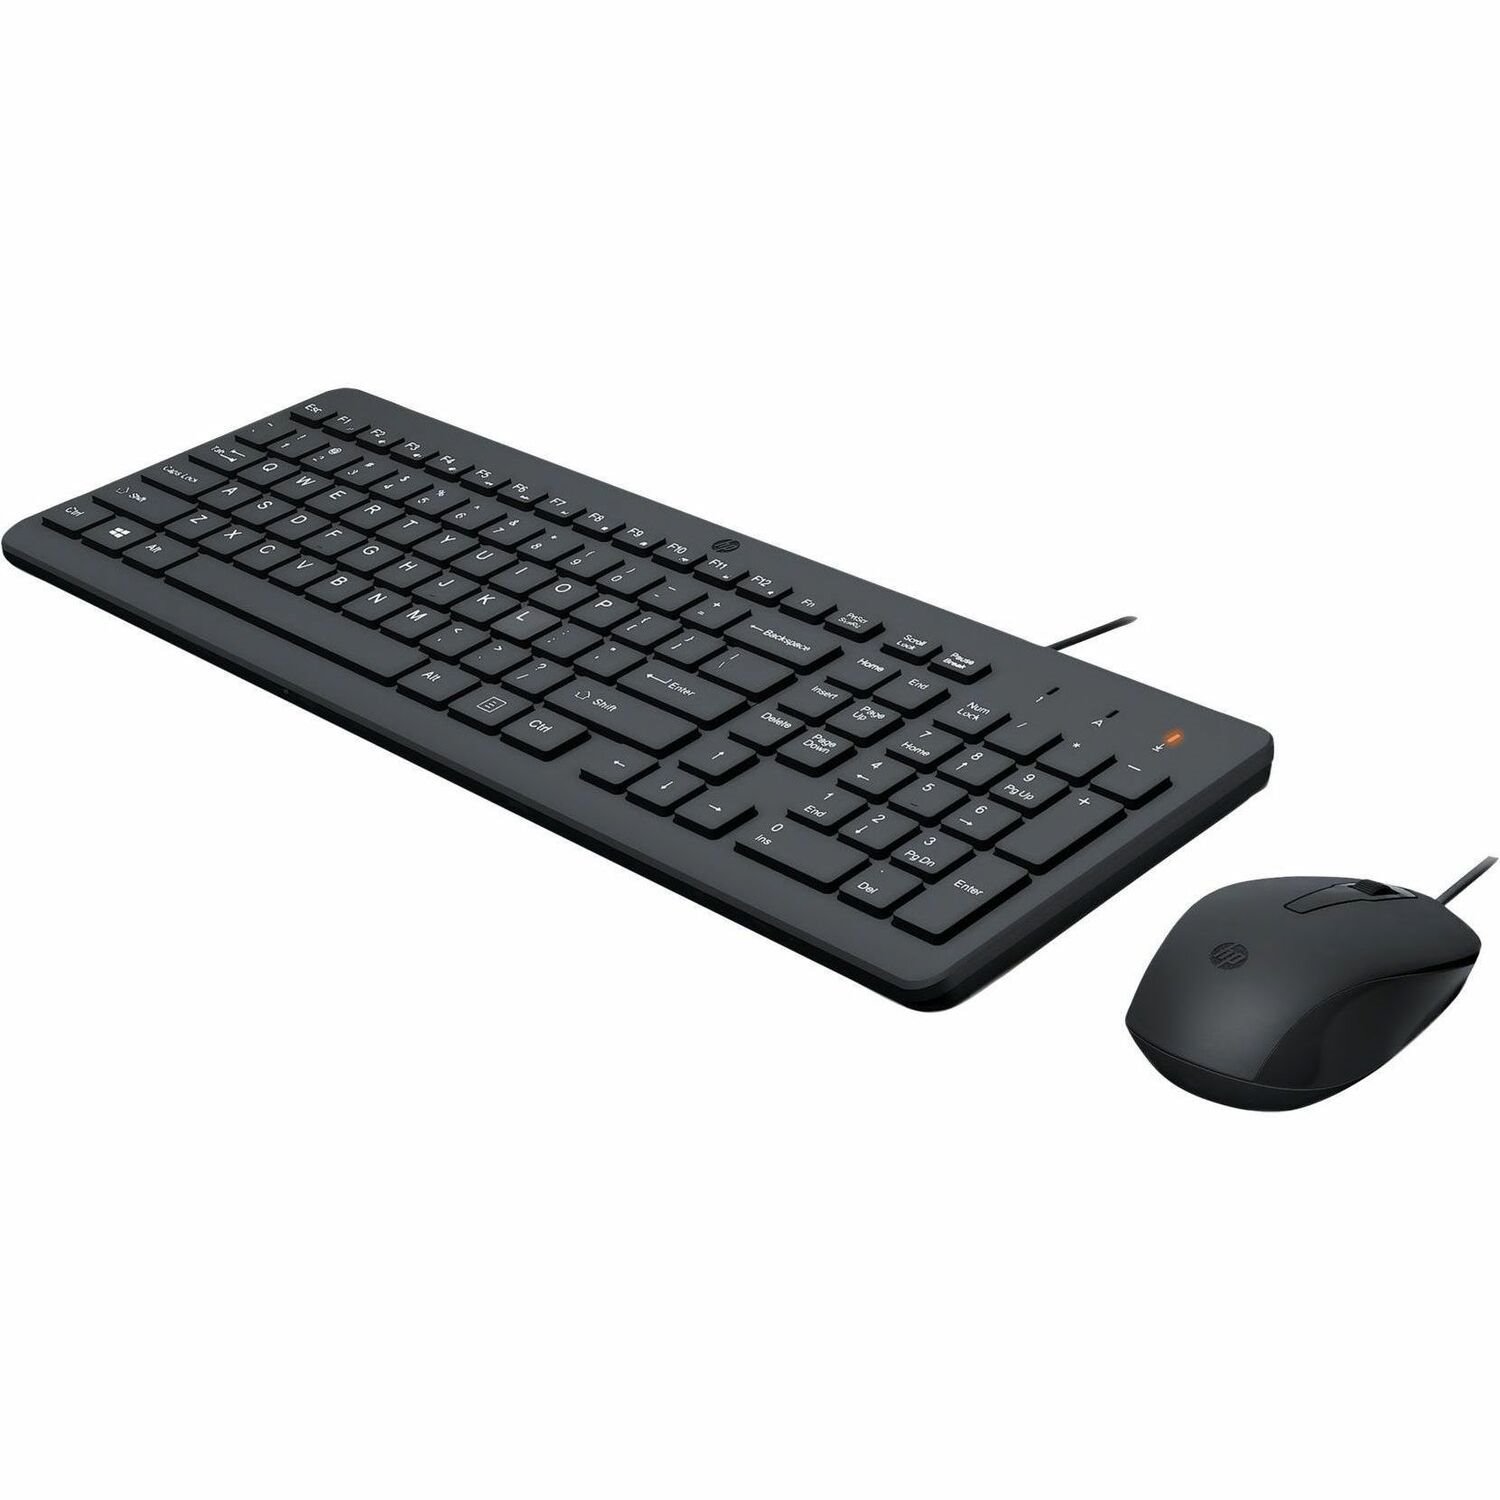 HP 150 Keyboard & Mouse